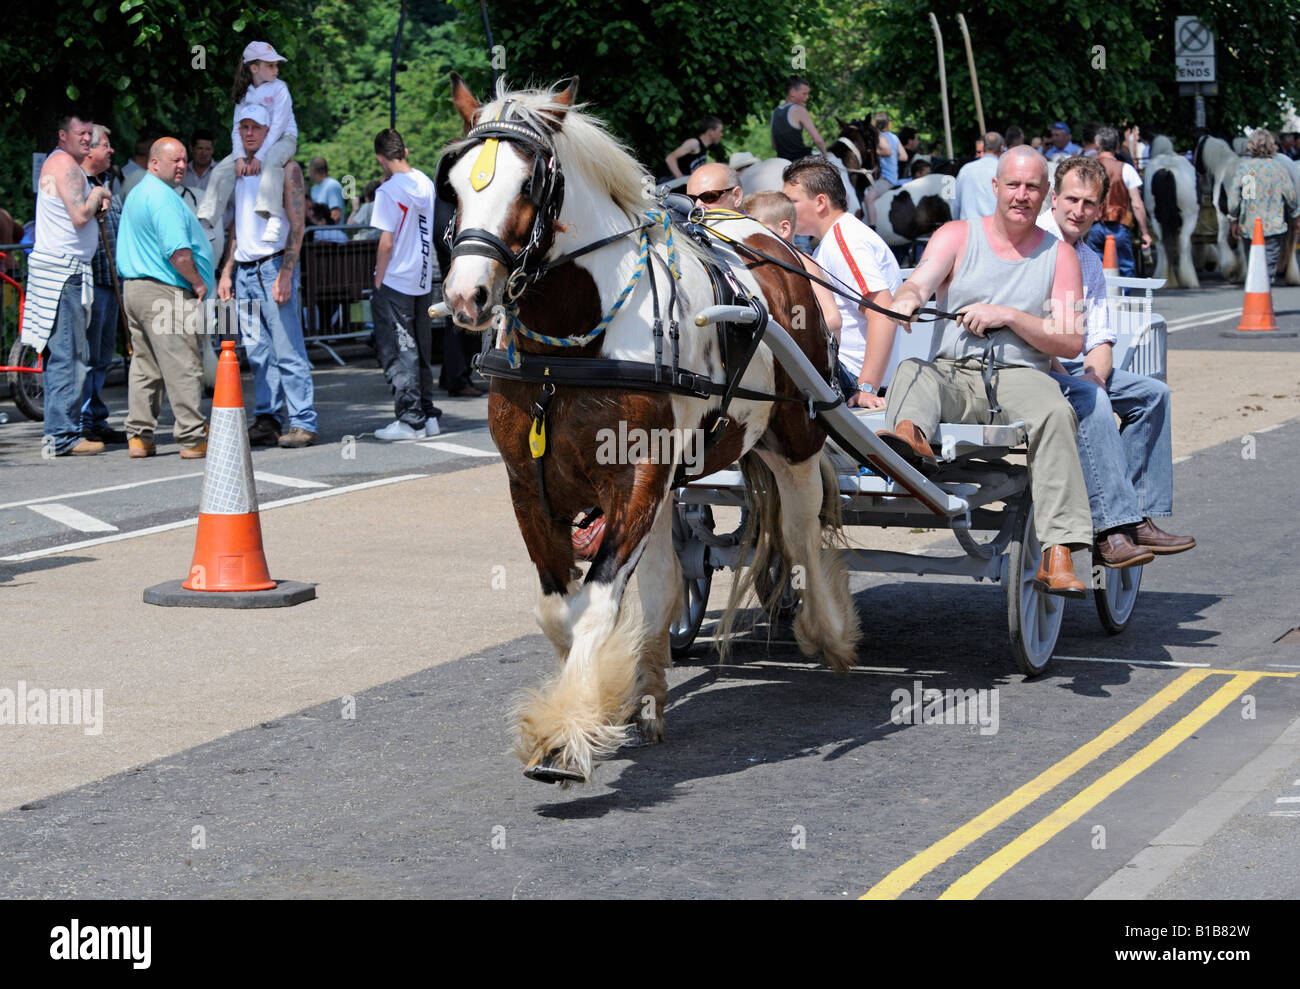 Gypsy travellers at Appleby Horse Fair. Appleby-in-Westmorland, Cumbria, England, United Kingdom, Europe. Stock Photo